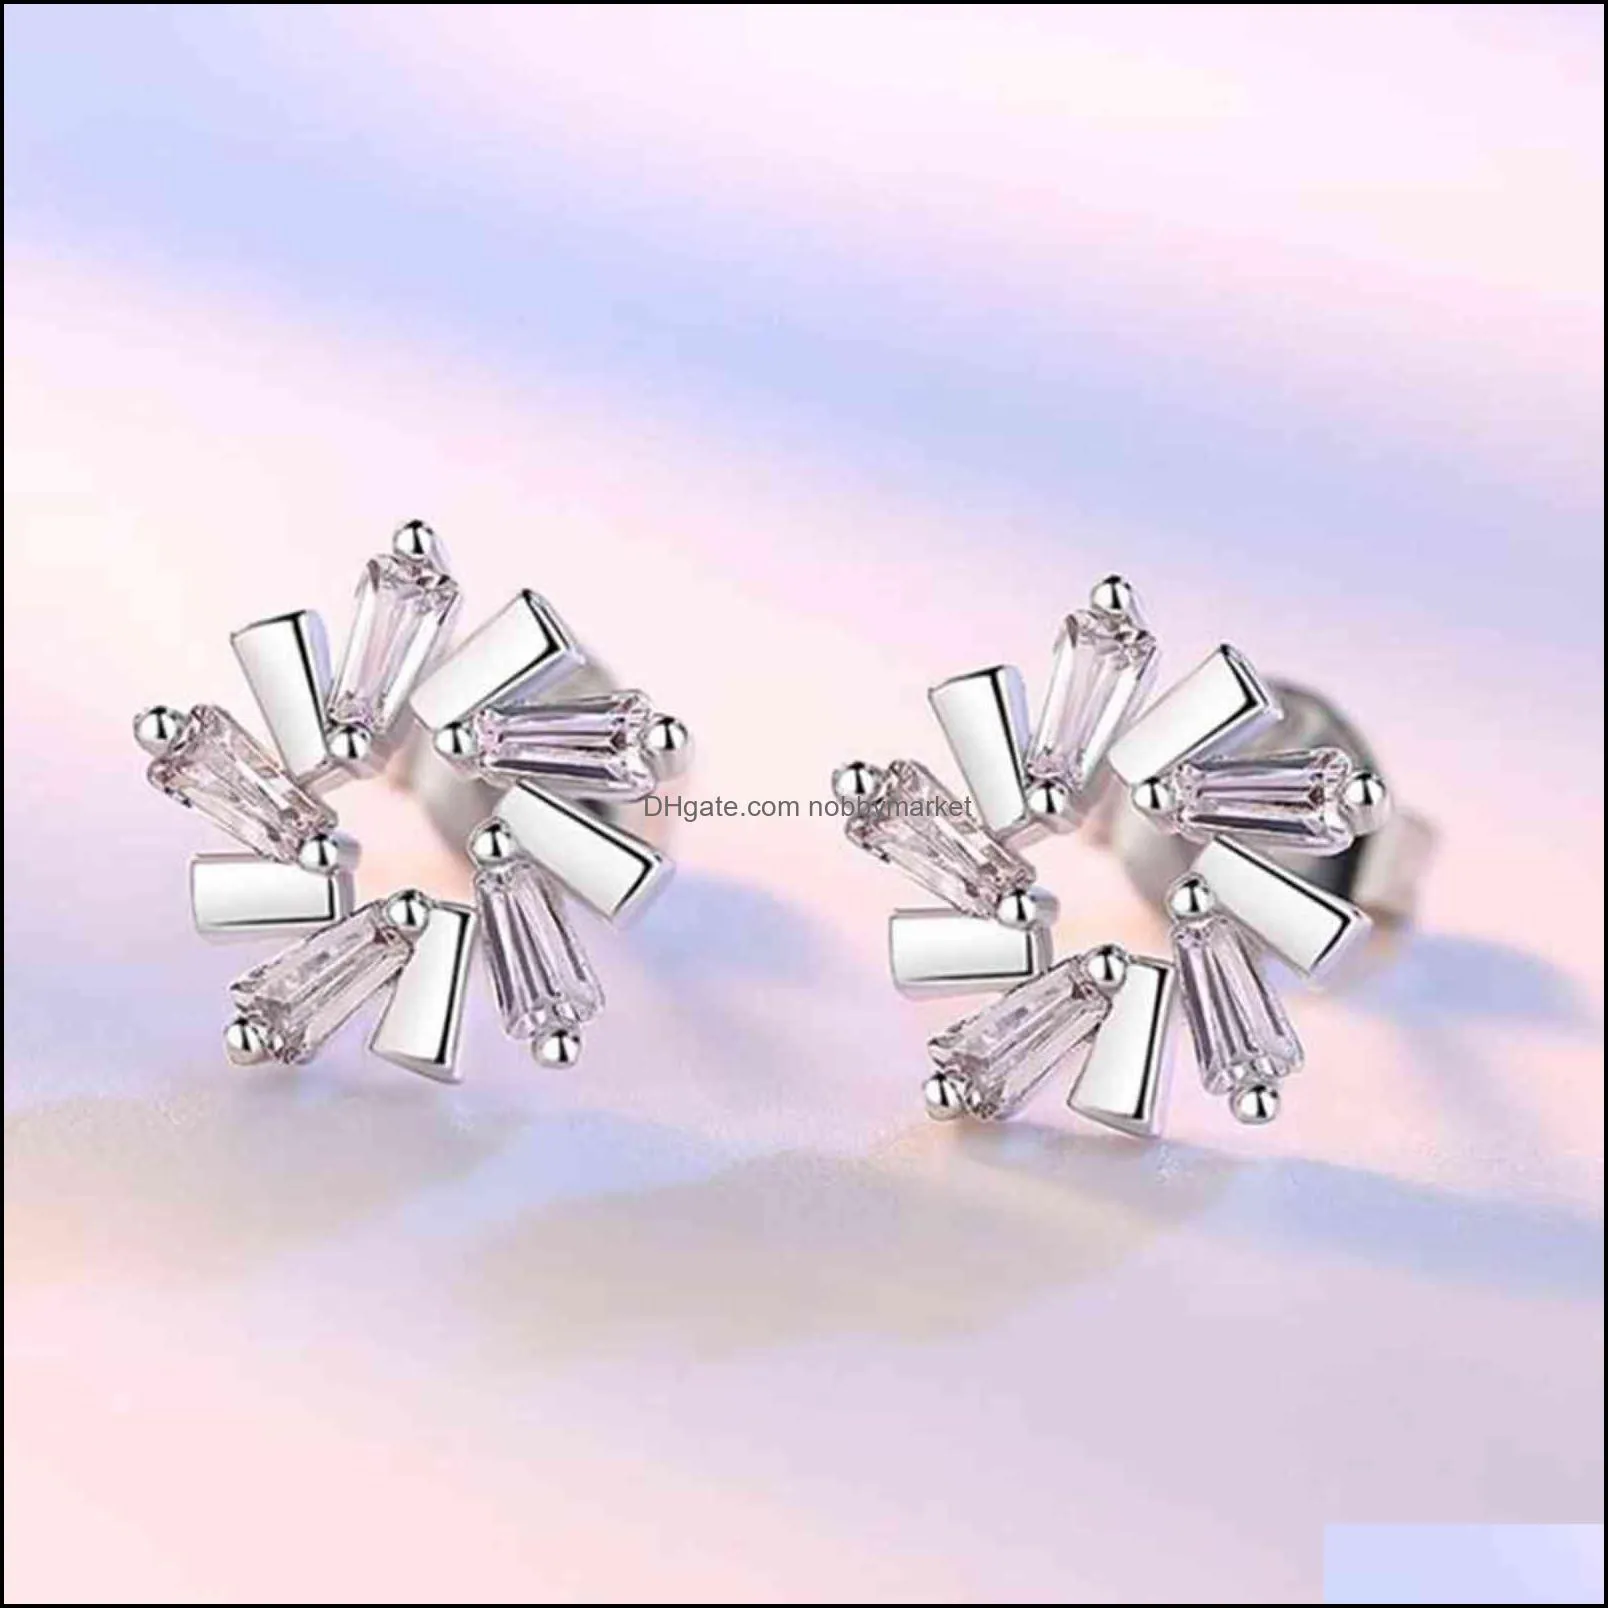 Nehzy 925 Sterling Silver New Woman Stud Earrings High Quality Retro Simple Cubic Zirconia Hot Original Crystal Jewelry